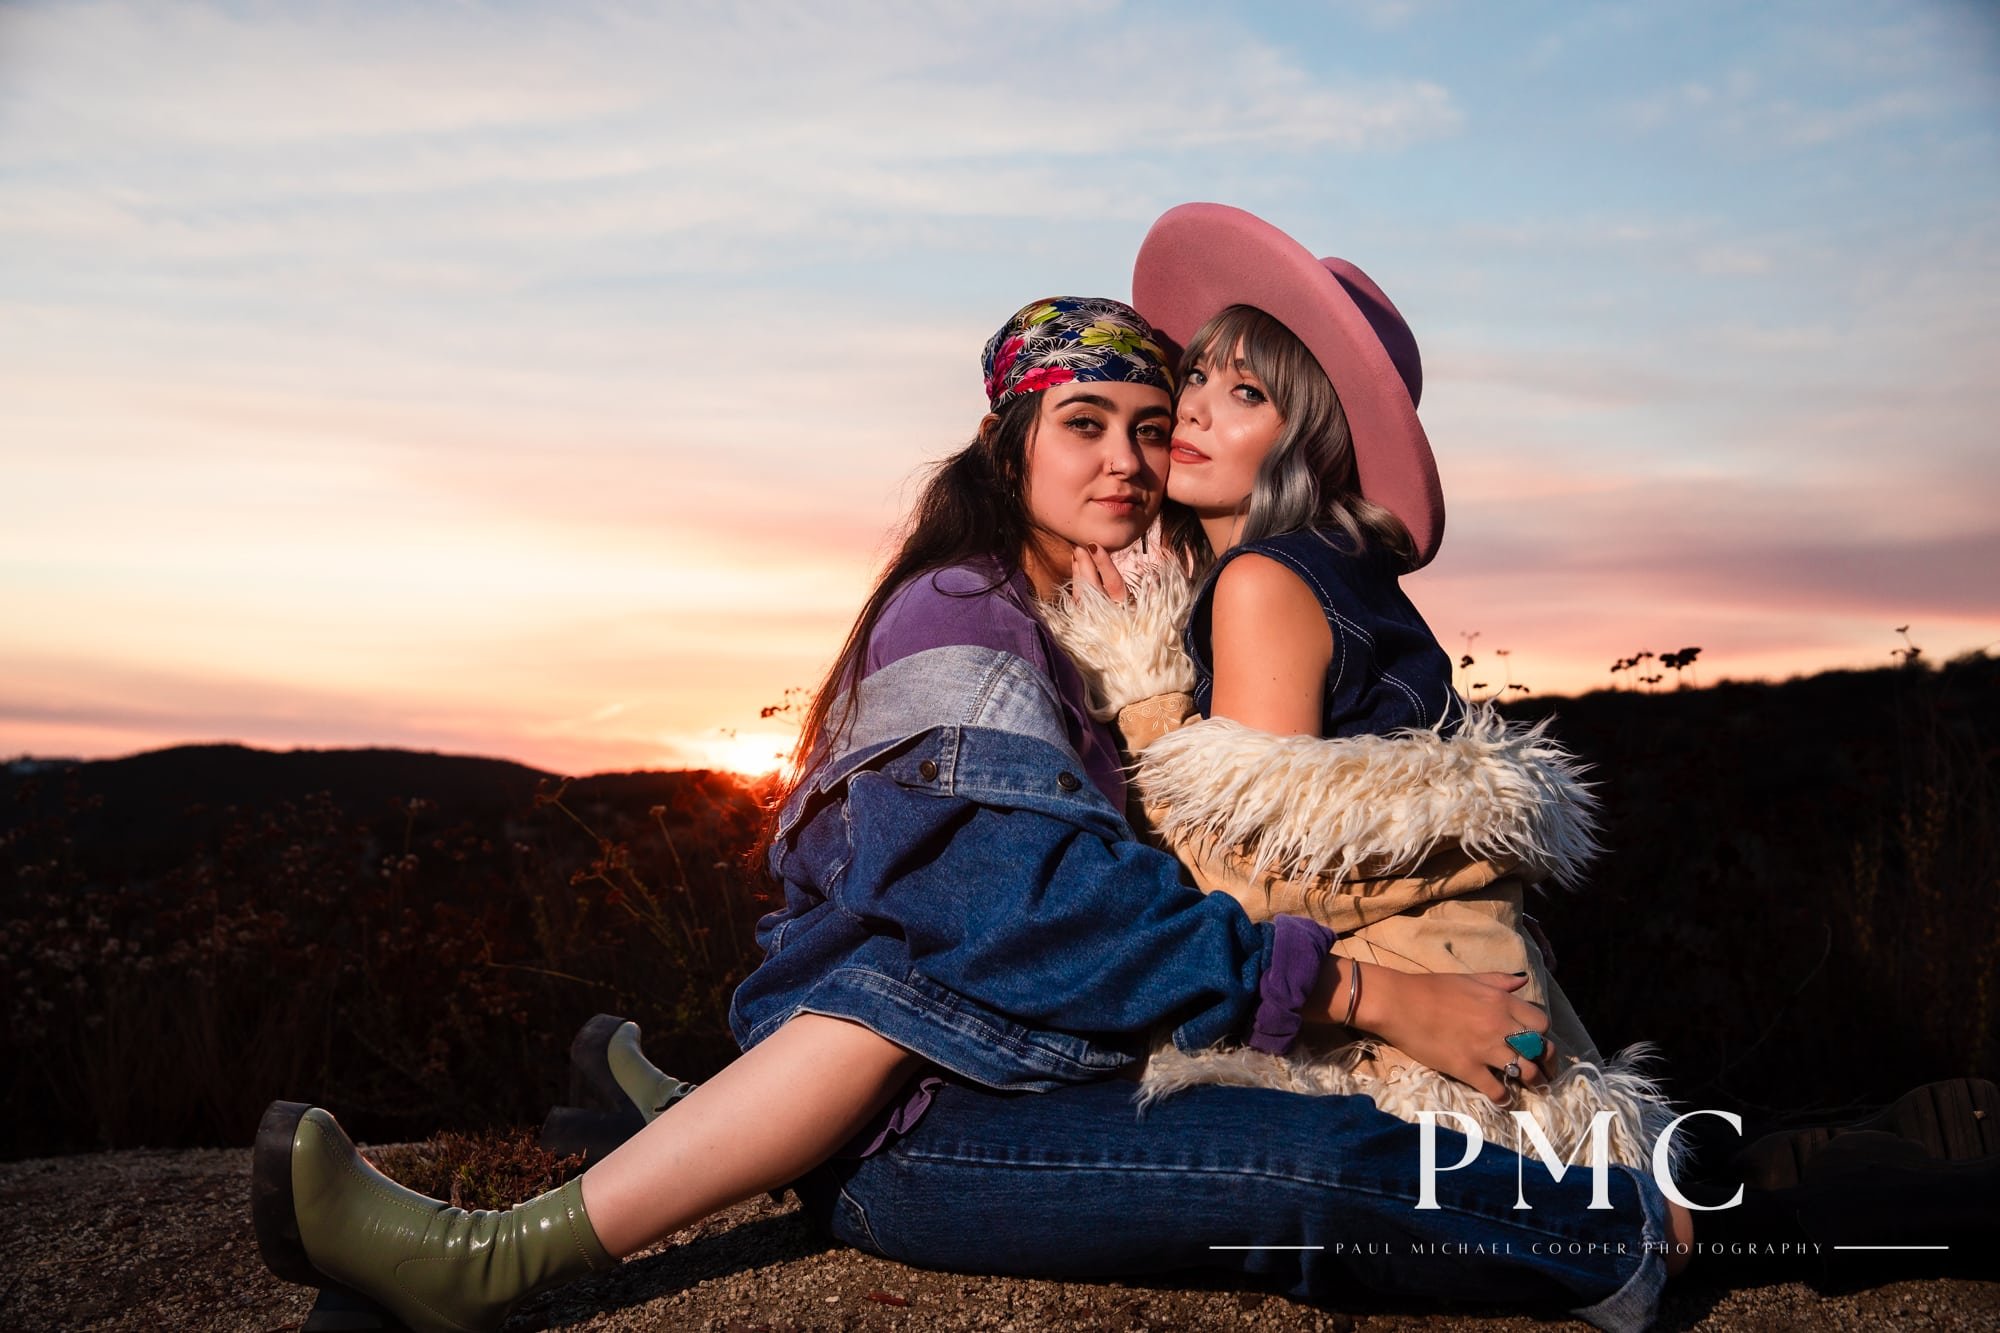 Gabriella + Jessica | A Stunning LGBTQ Engagement Session Bathed in Southern California's Sunshine | Temecula, CA